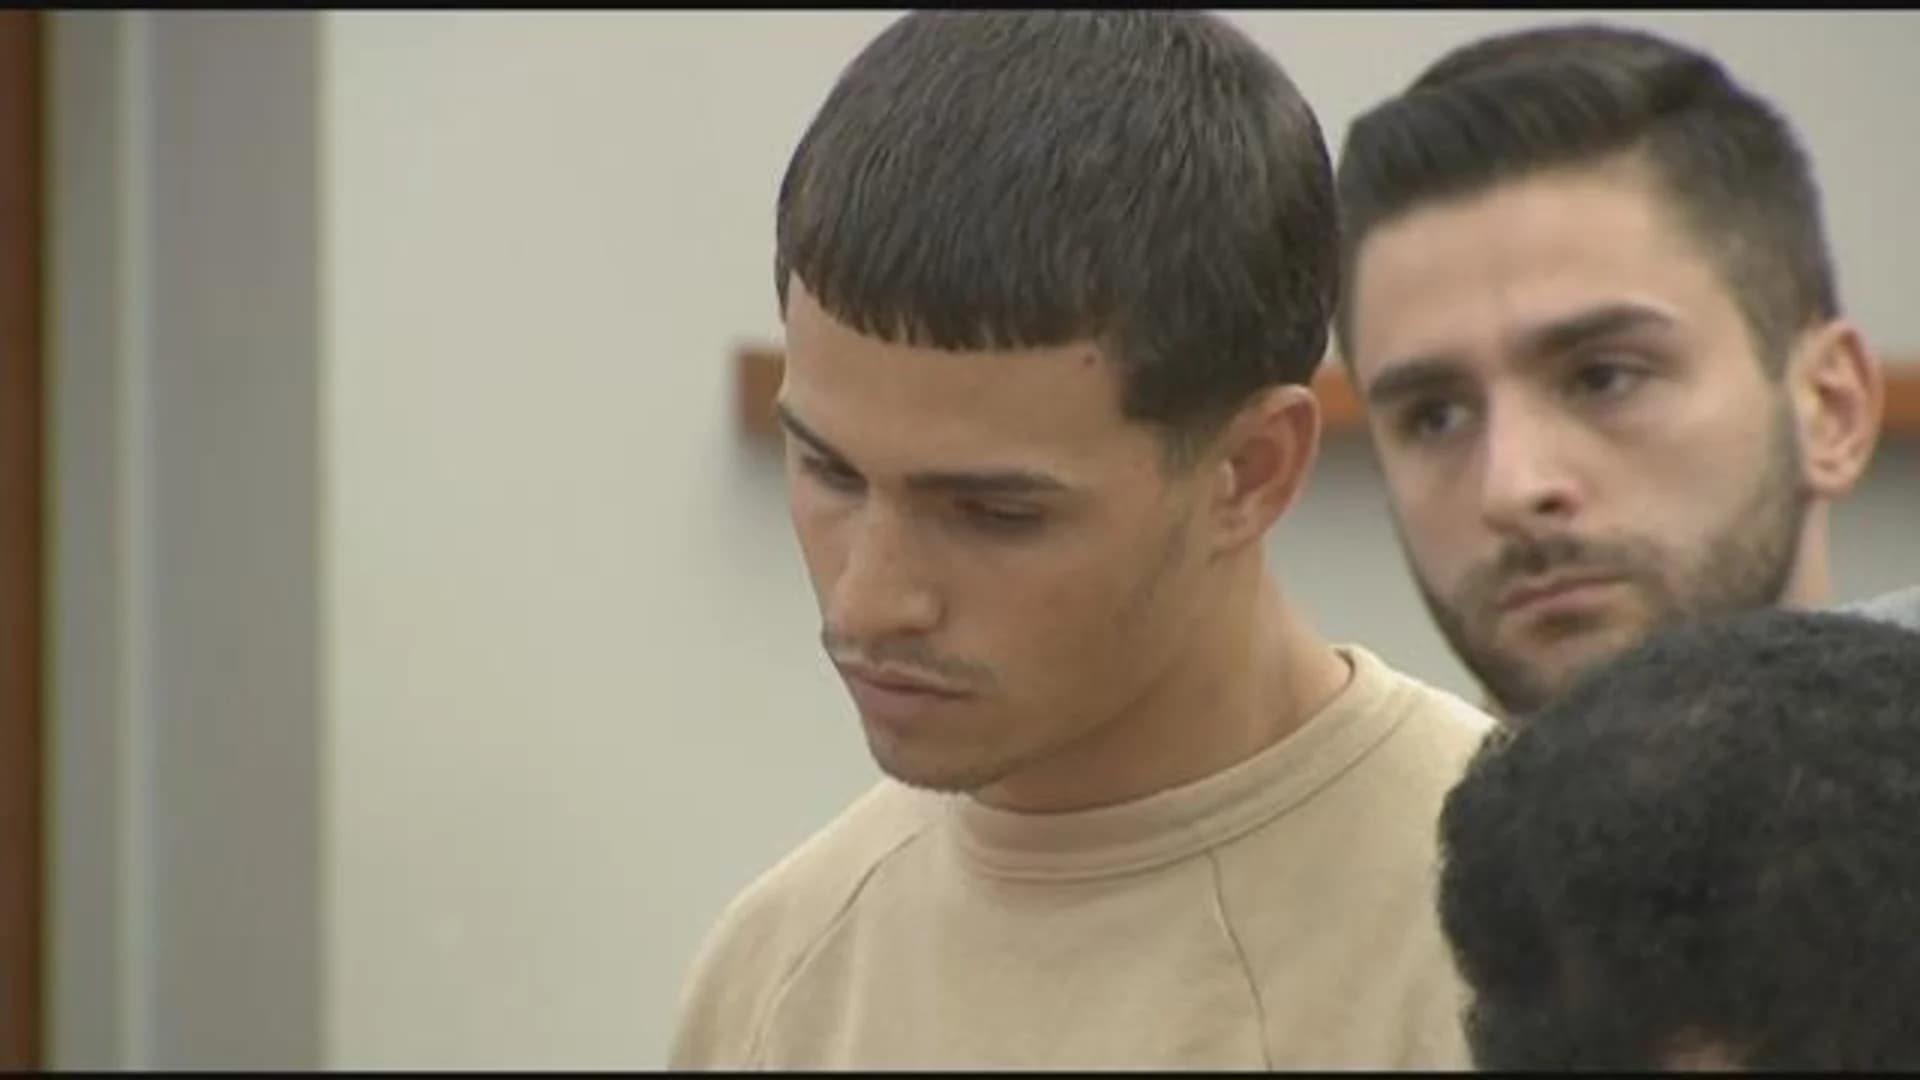 'Junior' suspect moved from Suffolk County jail